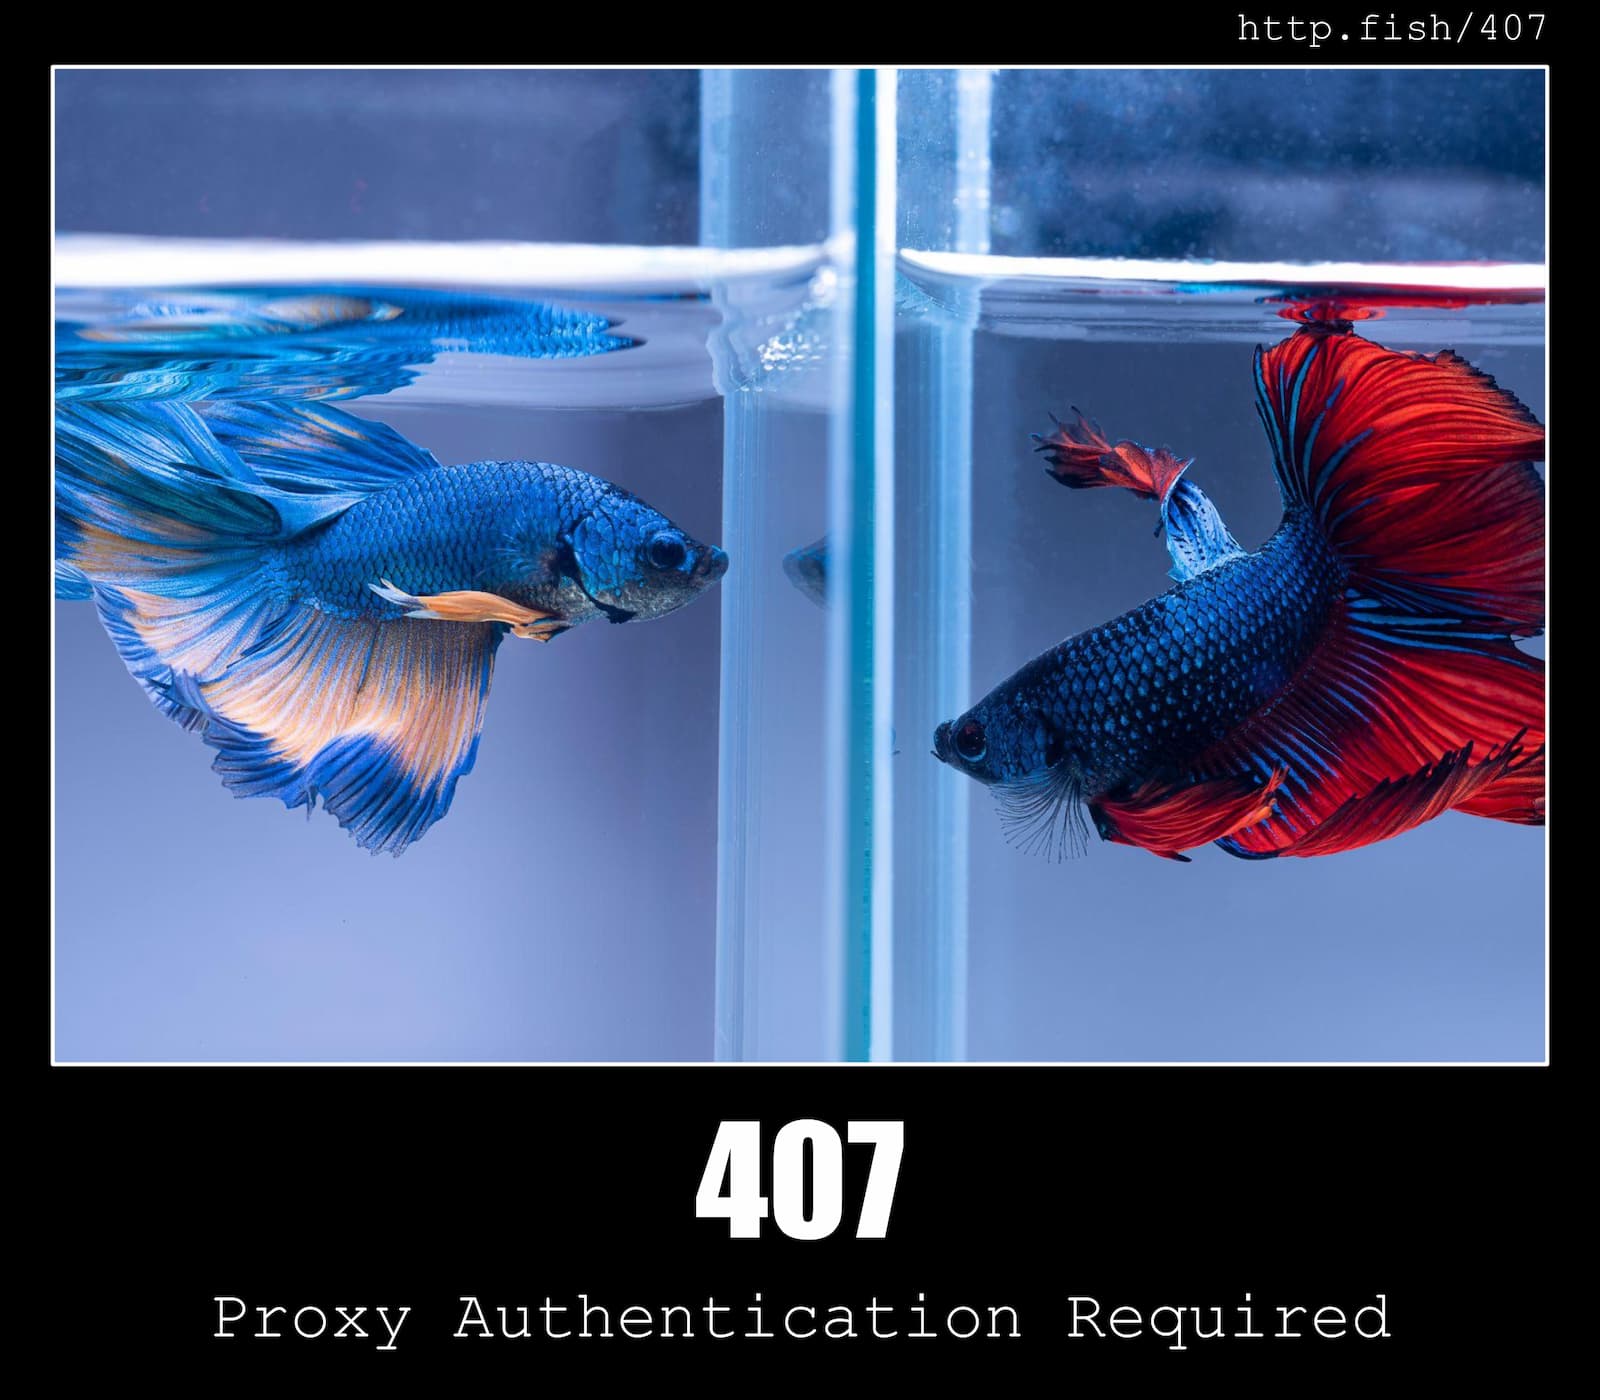 HTTP Status Code 407 Proxy Authentication Required & Fish